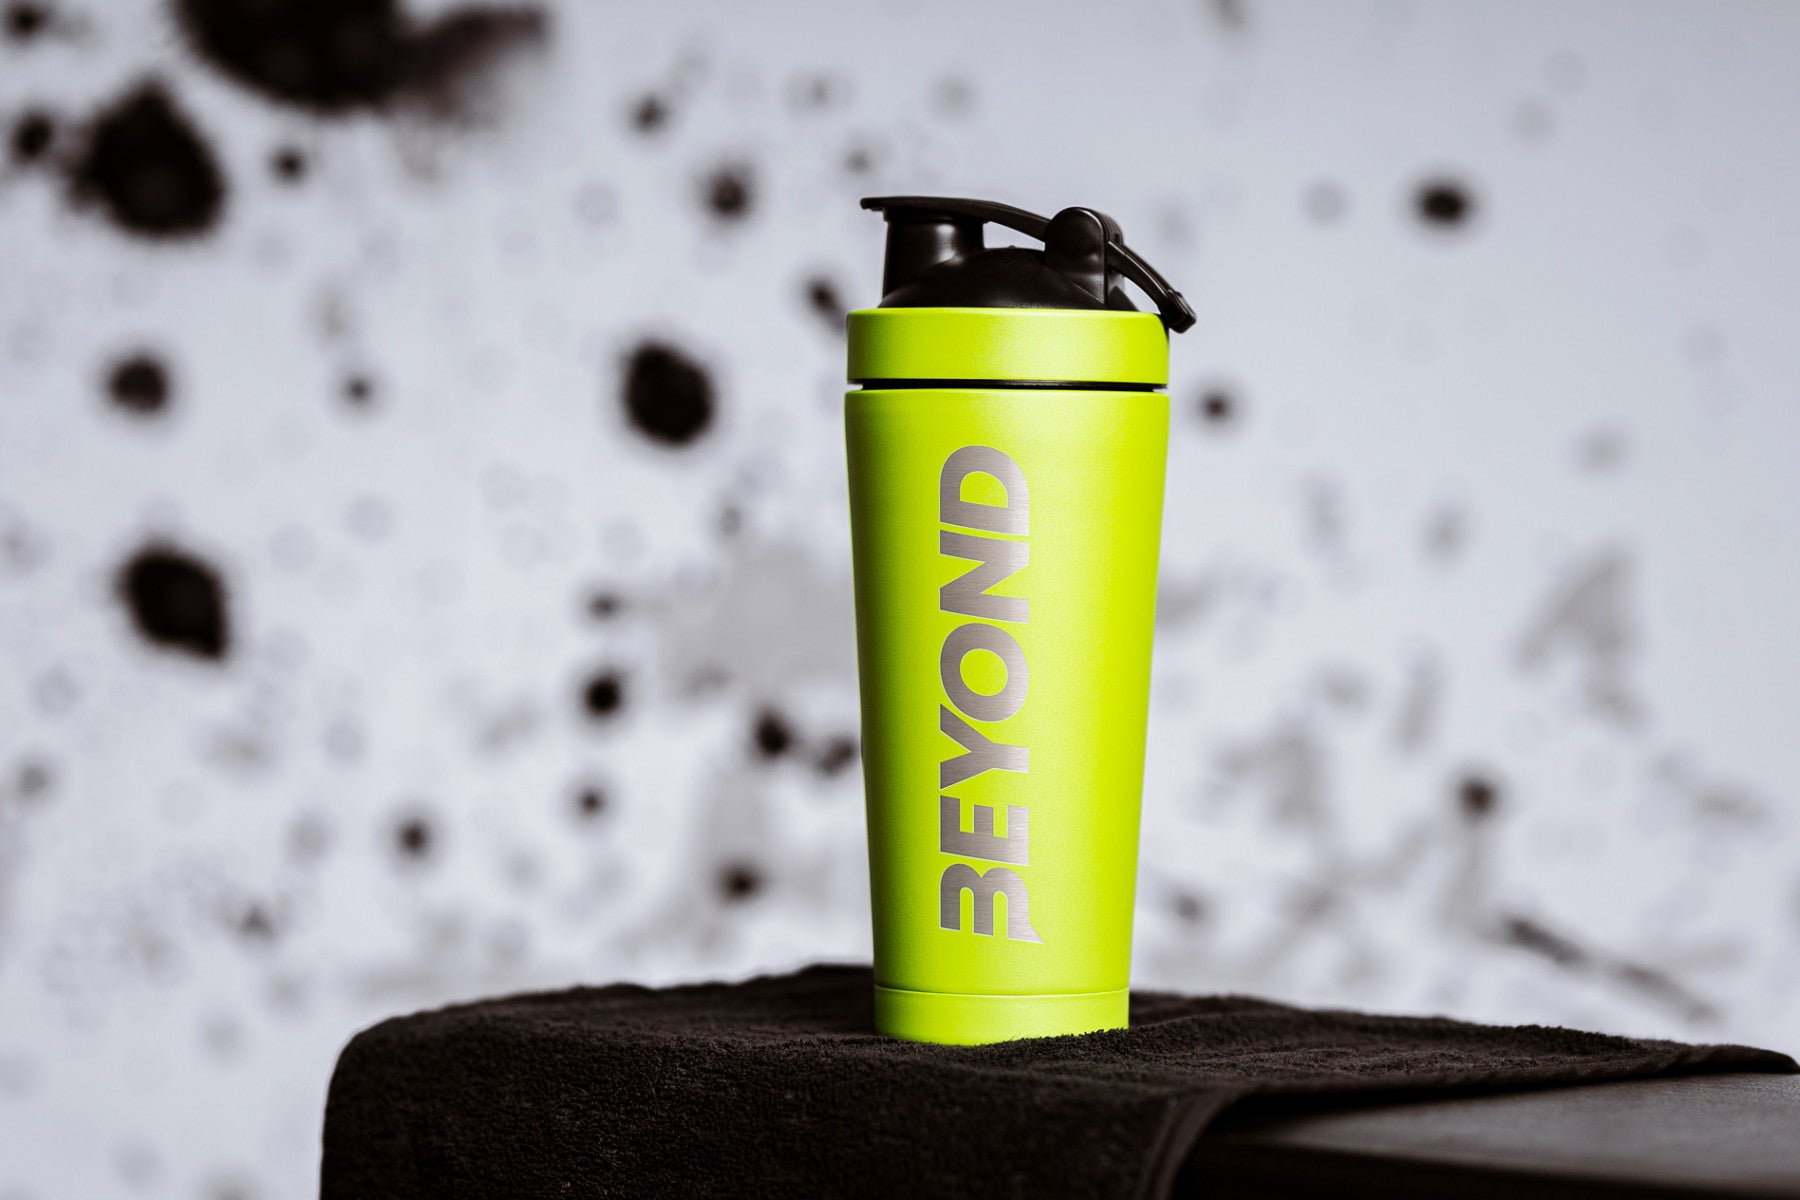 5 Perks of having a capsule-shaped protein shaker bottle by